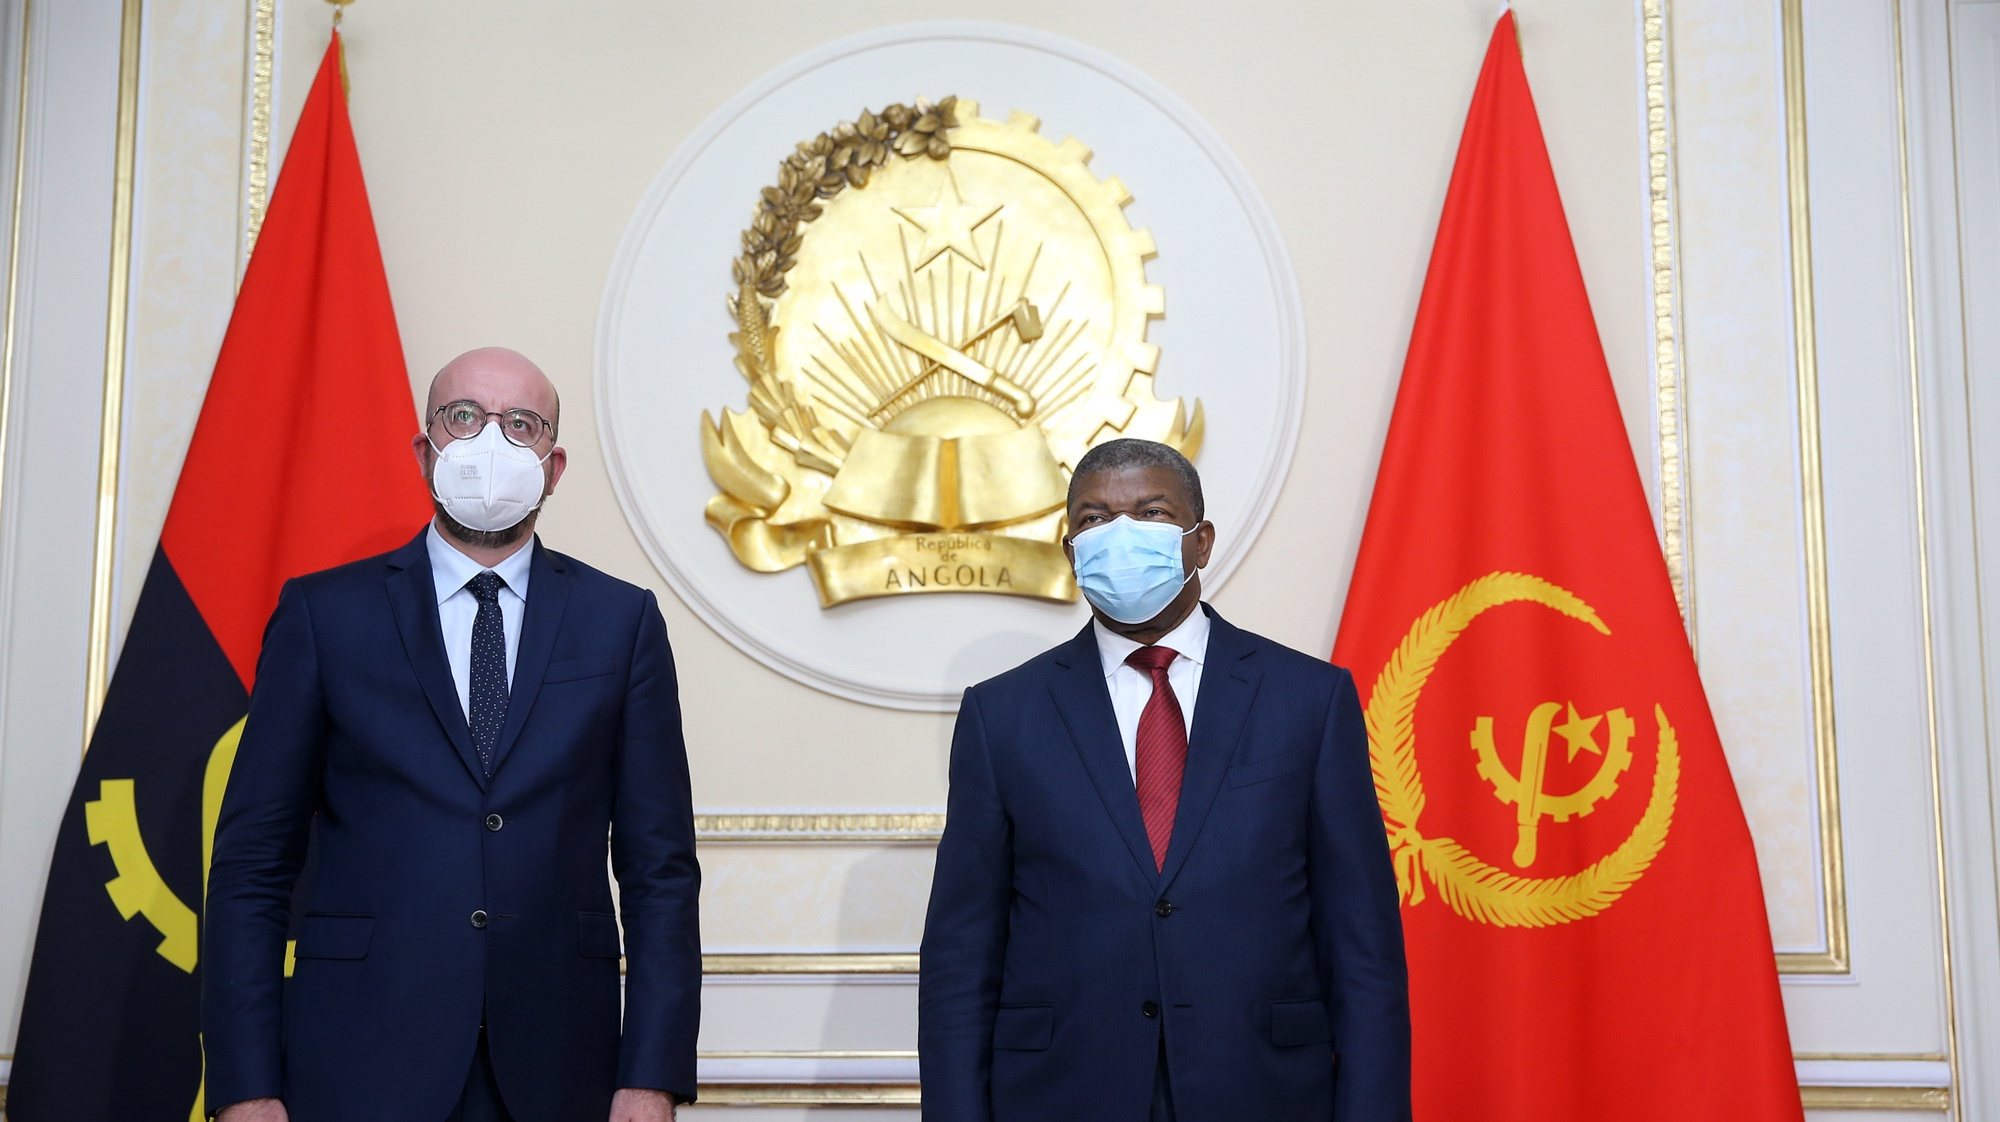 President of the European Council Charles Michel (L) is welcomed by the President of Angola Joao Lourenco (R) moments before a meeting at Presidential Palace in Luanda, Angola, 30 April 2021. AMPE ROGERIO/LUSA